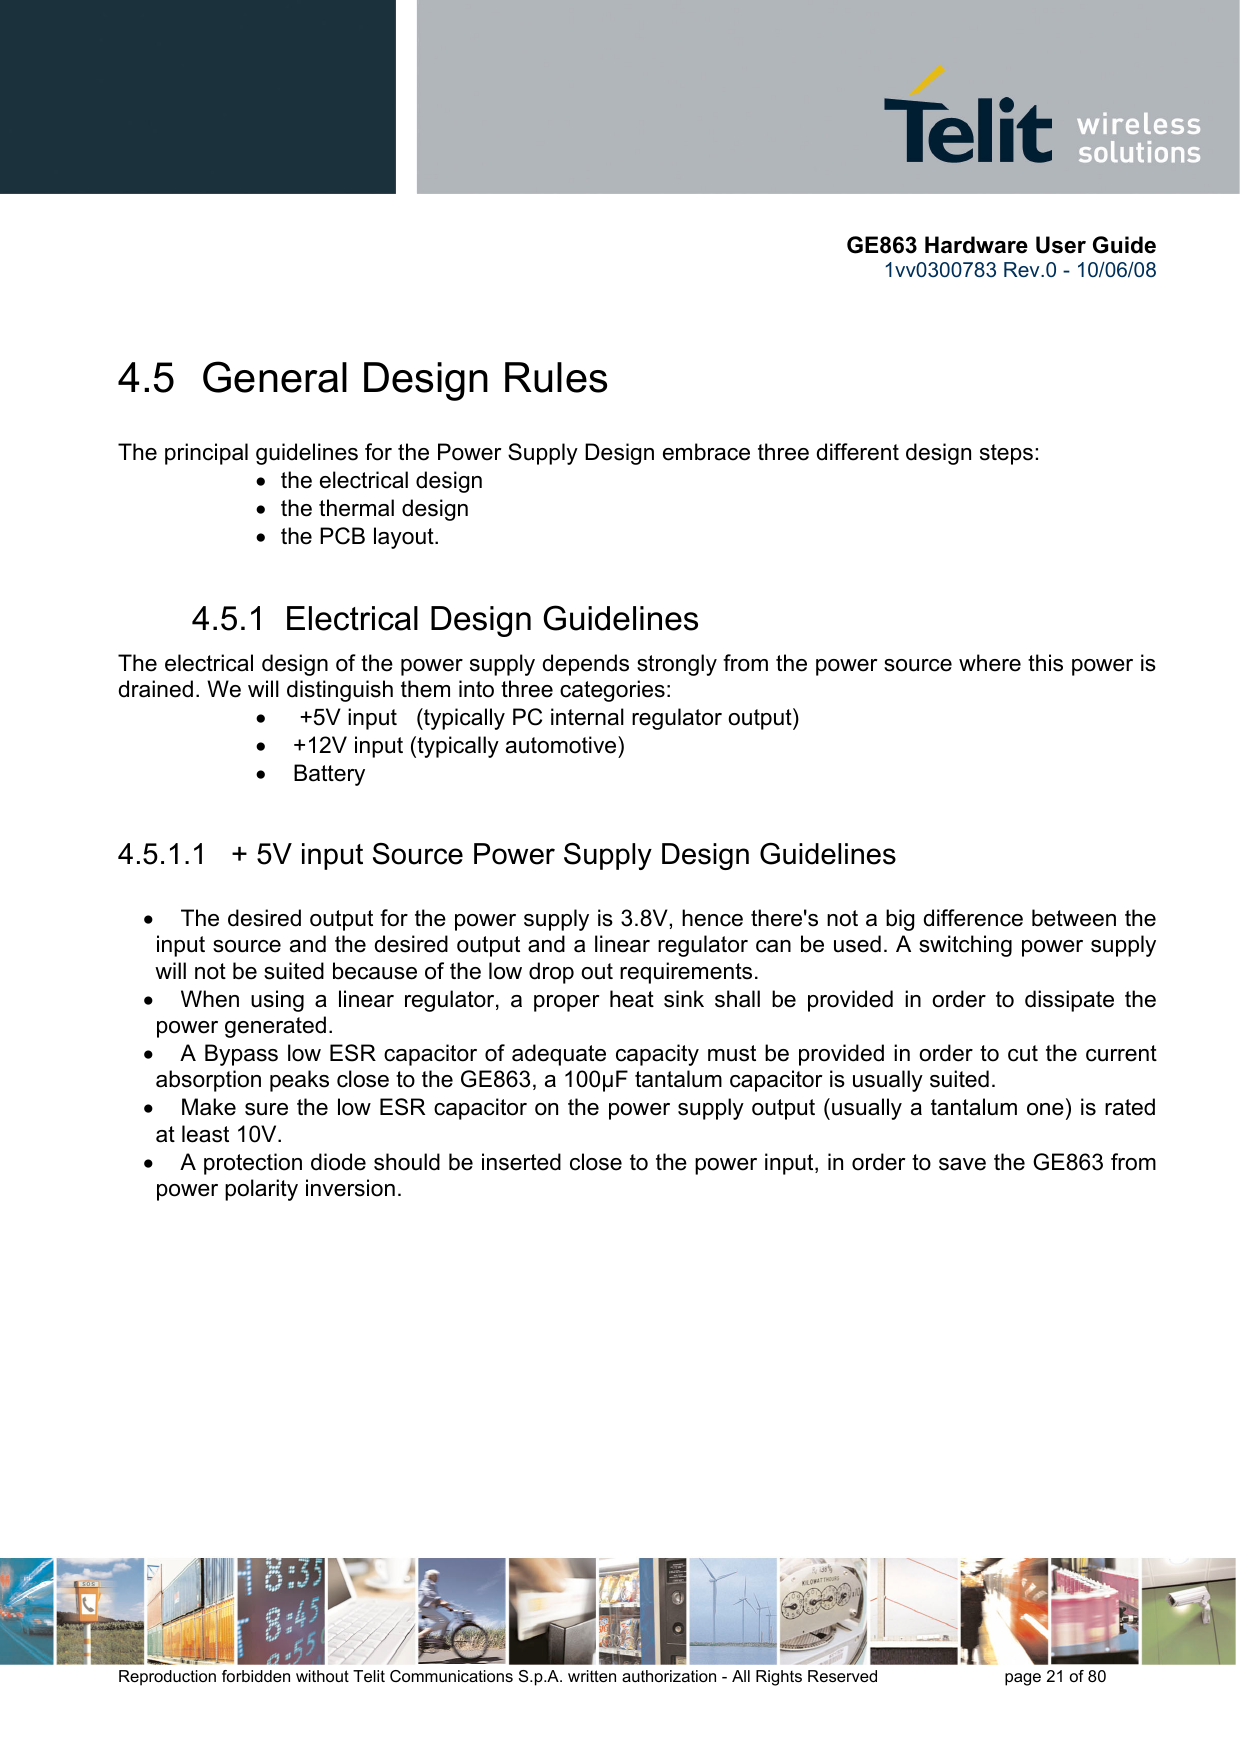       GE863 Hardware User Guide 1vv0300783 Rev.0 - 10/06/08 Reproduction forbidden without Telit Communications S.p.A. written authorization - All Rights Reserved    page 21 of 80   4.5  General Design Rules The principal guidelines for the Power Supply Design embrace three different design steps: •  the electrical design •  the thermal design •  the PCB layout. 4.5.1  Electrical Design Guidelines The electrical design of the power supply depends strongly from the power source where this power is drained. We will distinguish them into three categories: •   +5V input   (typically PC internal regulator output) •  +12V input (typically automotive) • Battery  4.5.1.1   + 5V input Source Power Supply Design Guidelines  •  The desired output for the power supply is 3.8V, hence there&apos;s not a big difference between the input source and the desired output and a linear regulator can be used. A switching power supply will not be suited because of the low drop out requirements. •  When using a linear regulator, a proper heat sink shall be provided in order to dissipate the power generated. •  A Bypass low ESR capacitor of adequate capacity must be provided in order to cut the current absorption peaks close to the GE863, a 100μF tantalum capacitor is usually suited. •  Make sure the low ESR capacitor on the power supply output (usually a tantalum one) is rated at least 10V. •  A protection diode should be inserted close to the power input, in order to save the GE863 from power polarity inversion. 